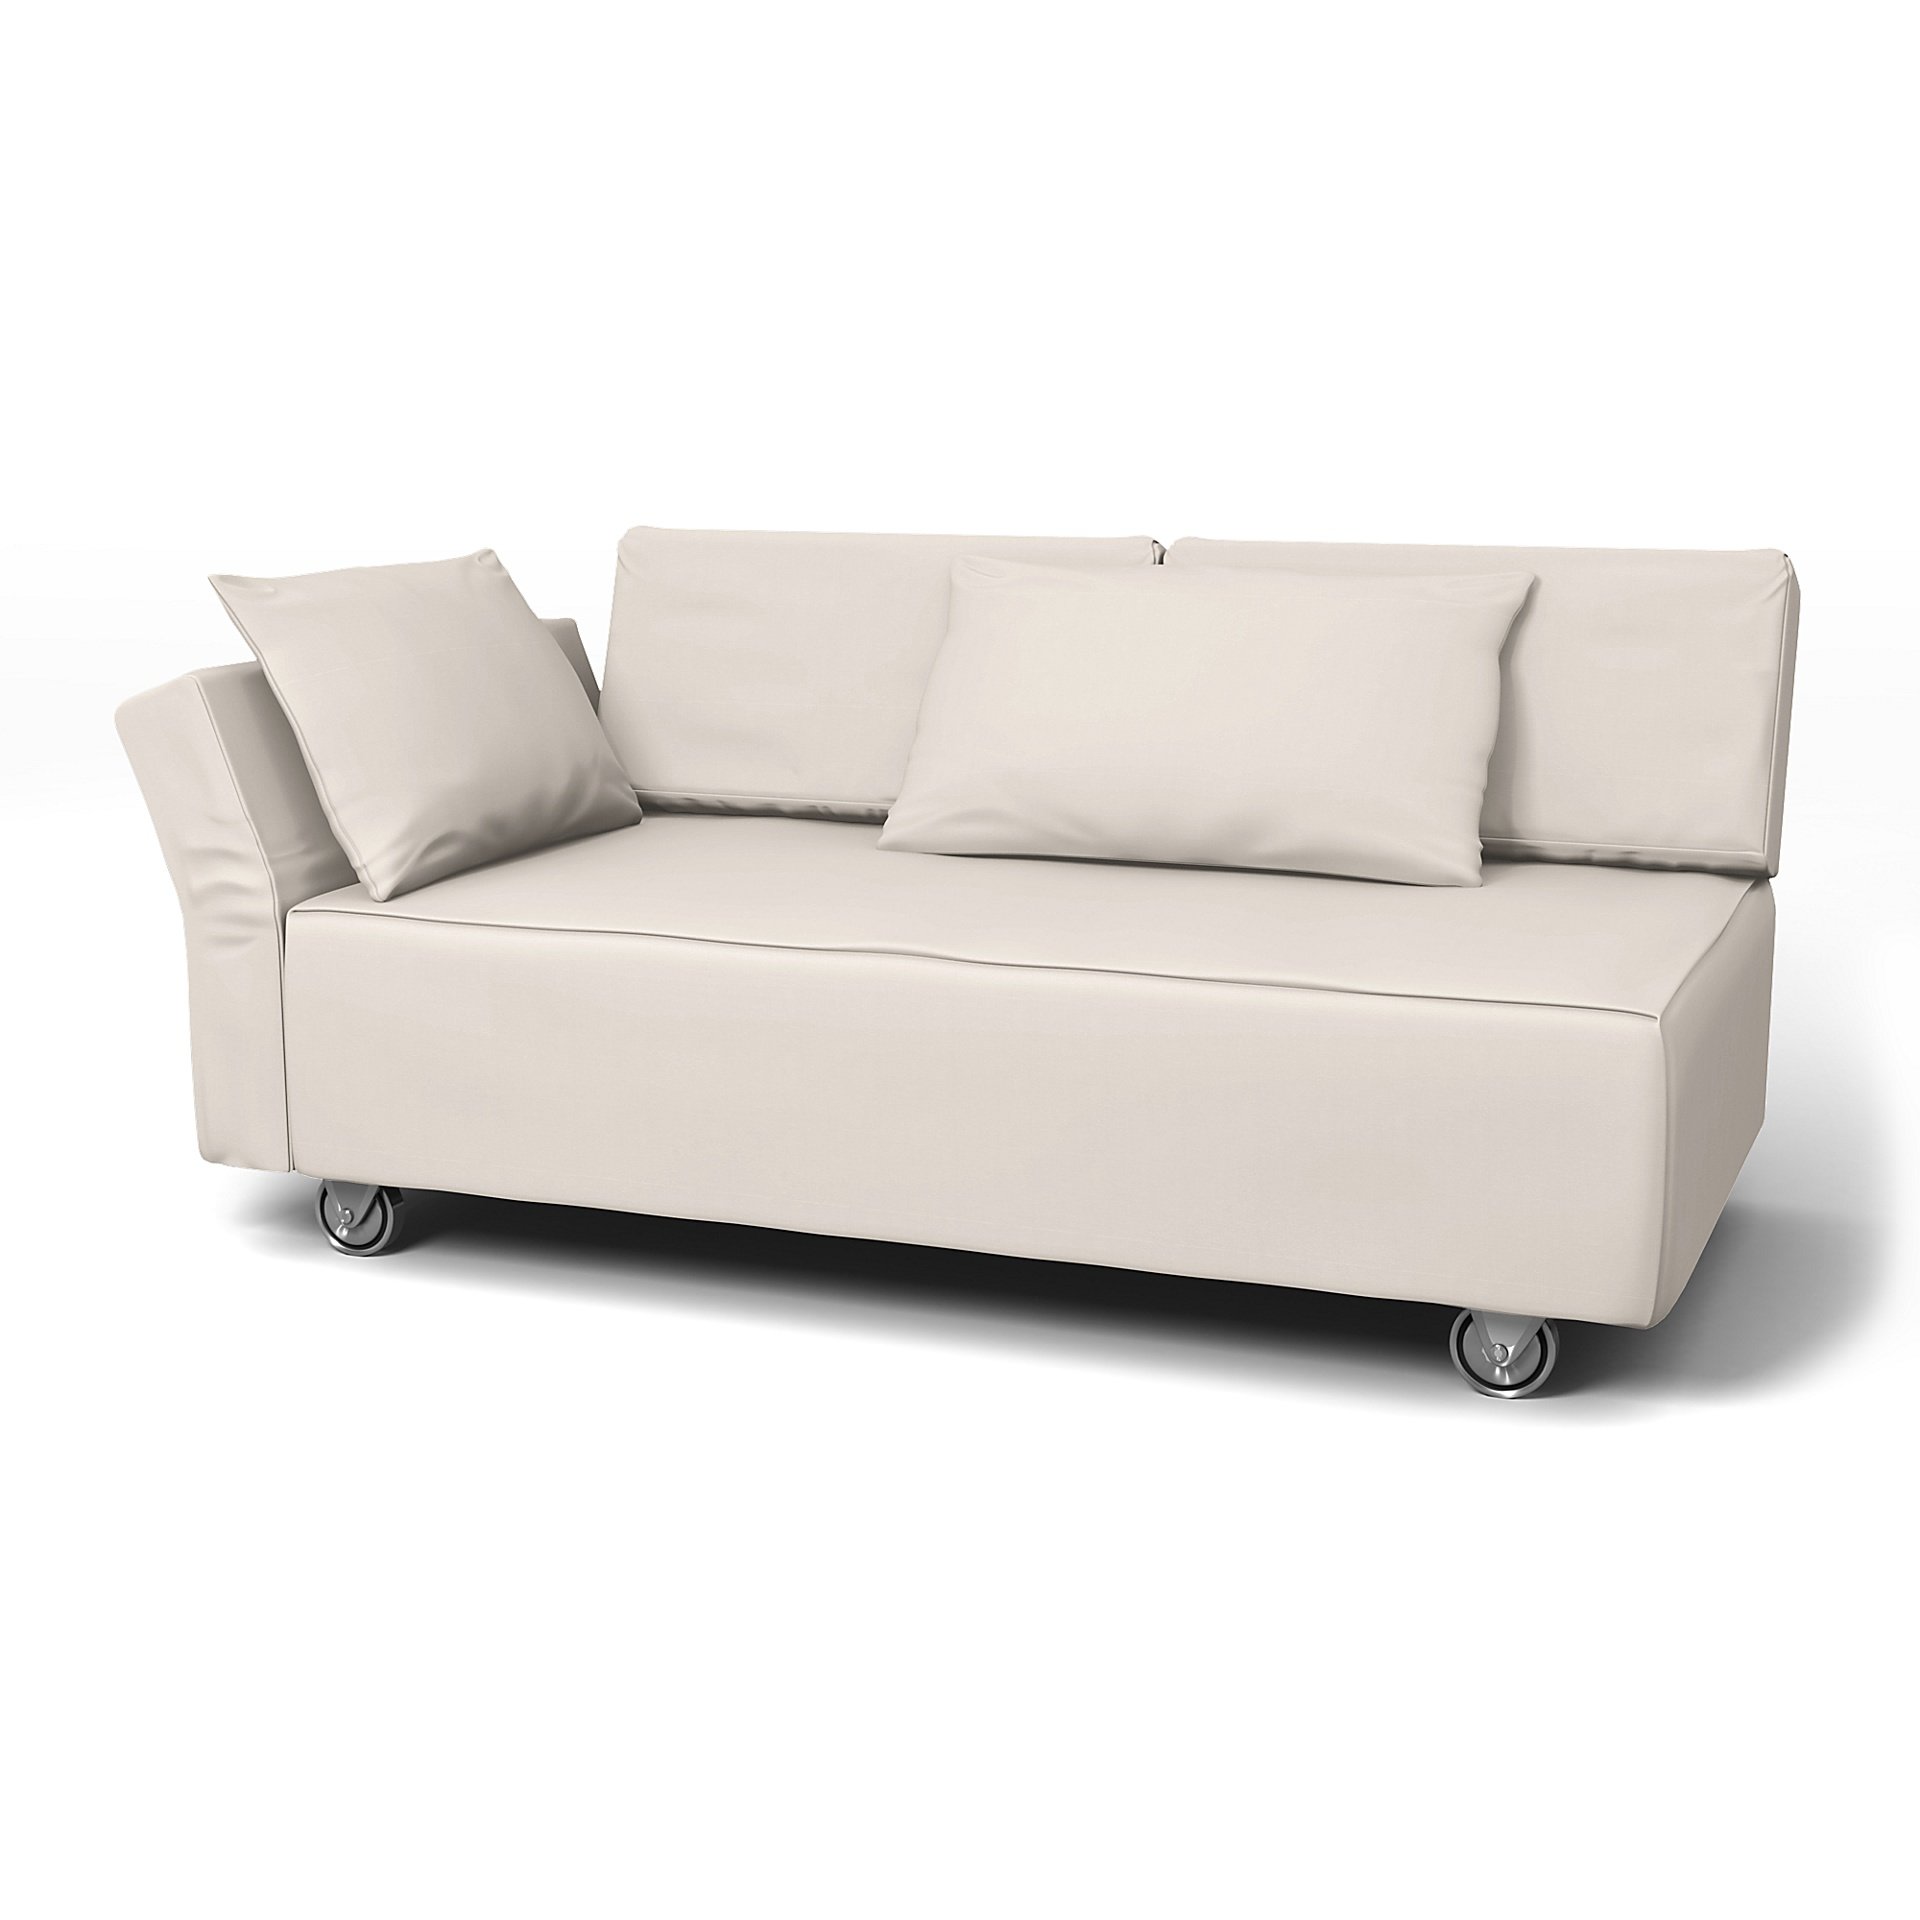 IKEA - Falsterbo 2 Seat Sofa with Left Arm Cover, Soft White, Cotton - Bemz